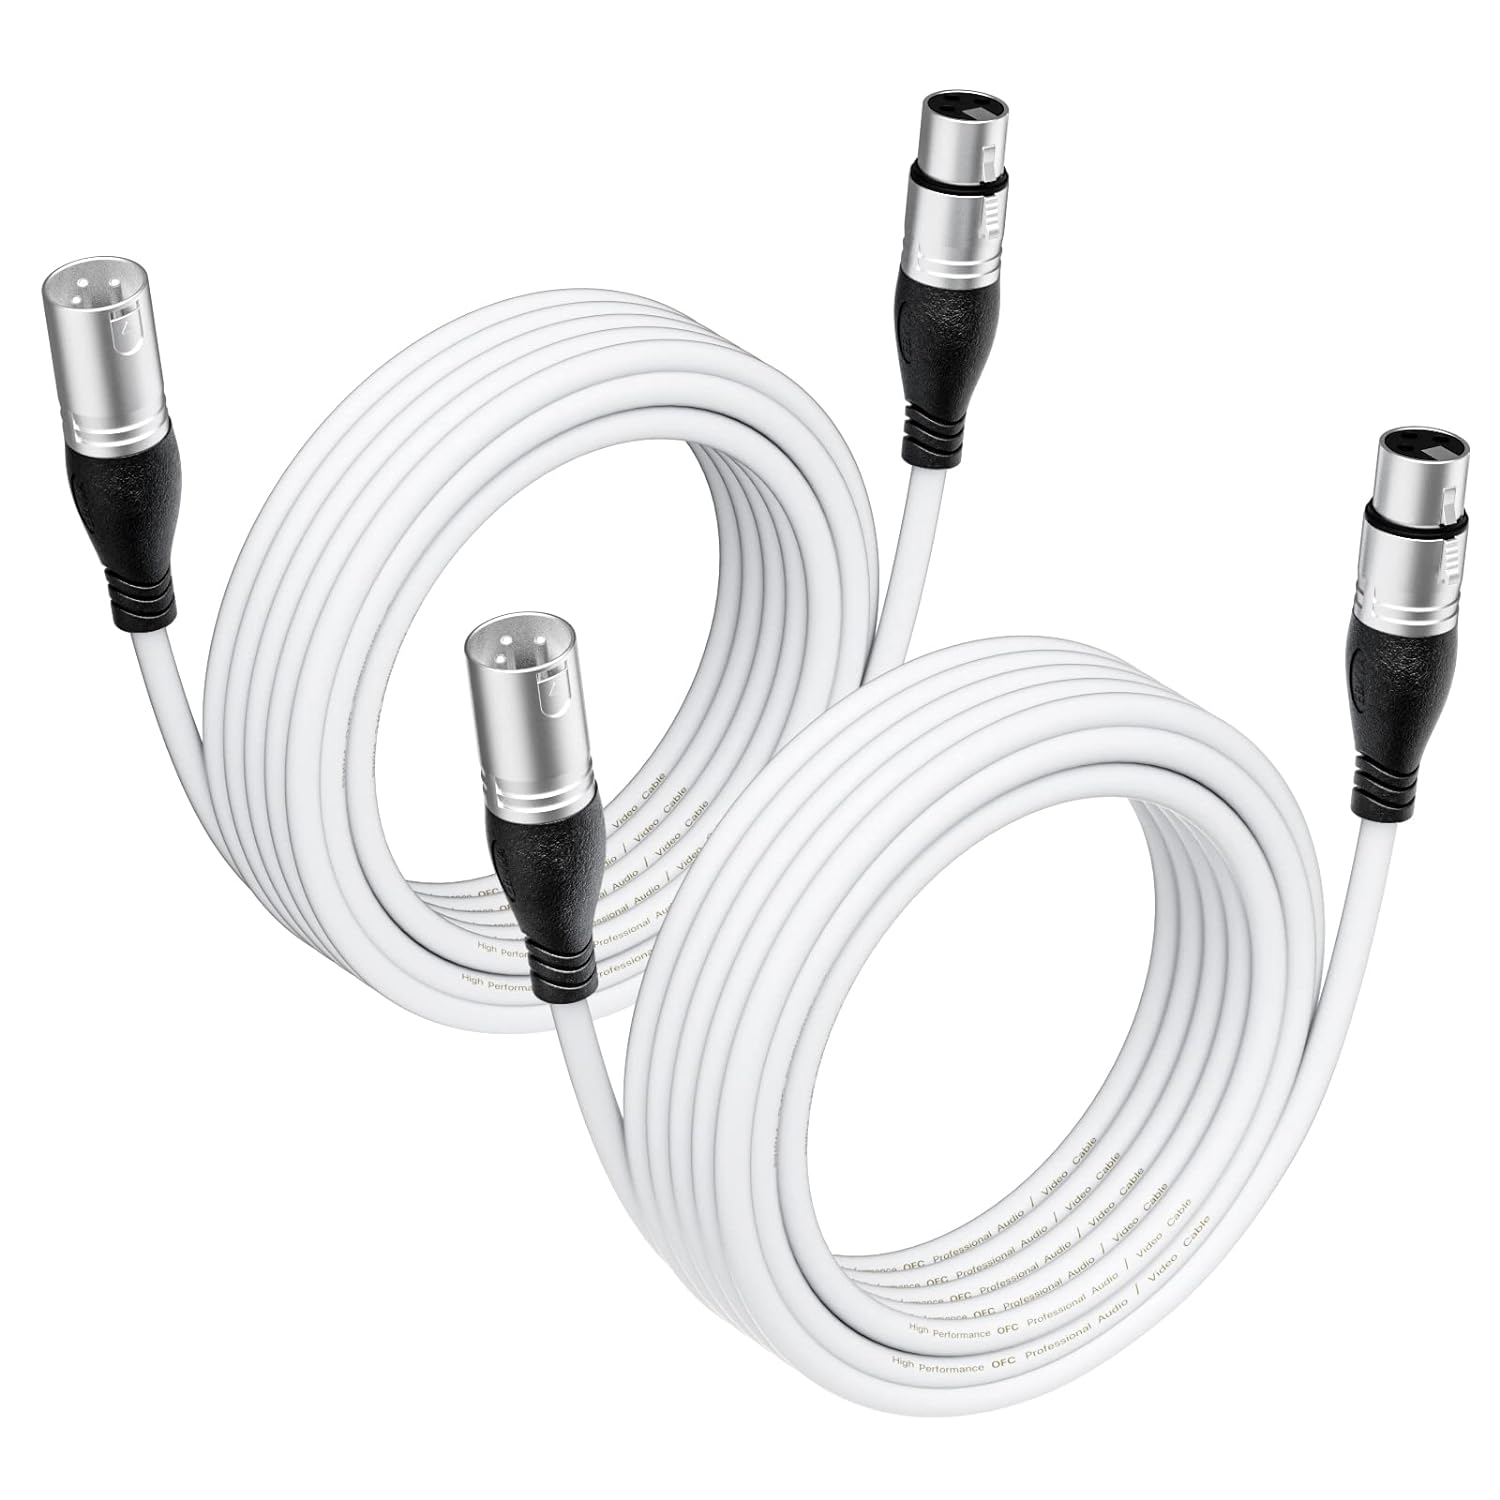 EBXYA XLR Cable 10 Ft 2 Packs - Premium Microphone Cable Patch Speaker Cable 3-Pin XLR Male to Female, White